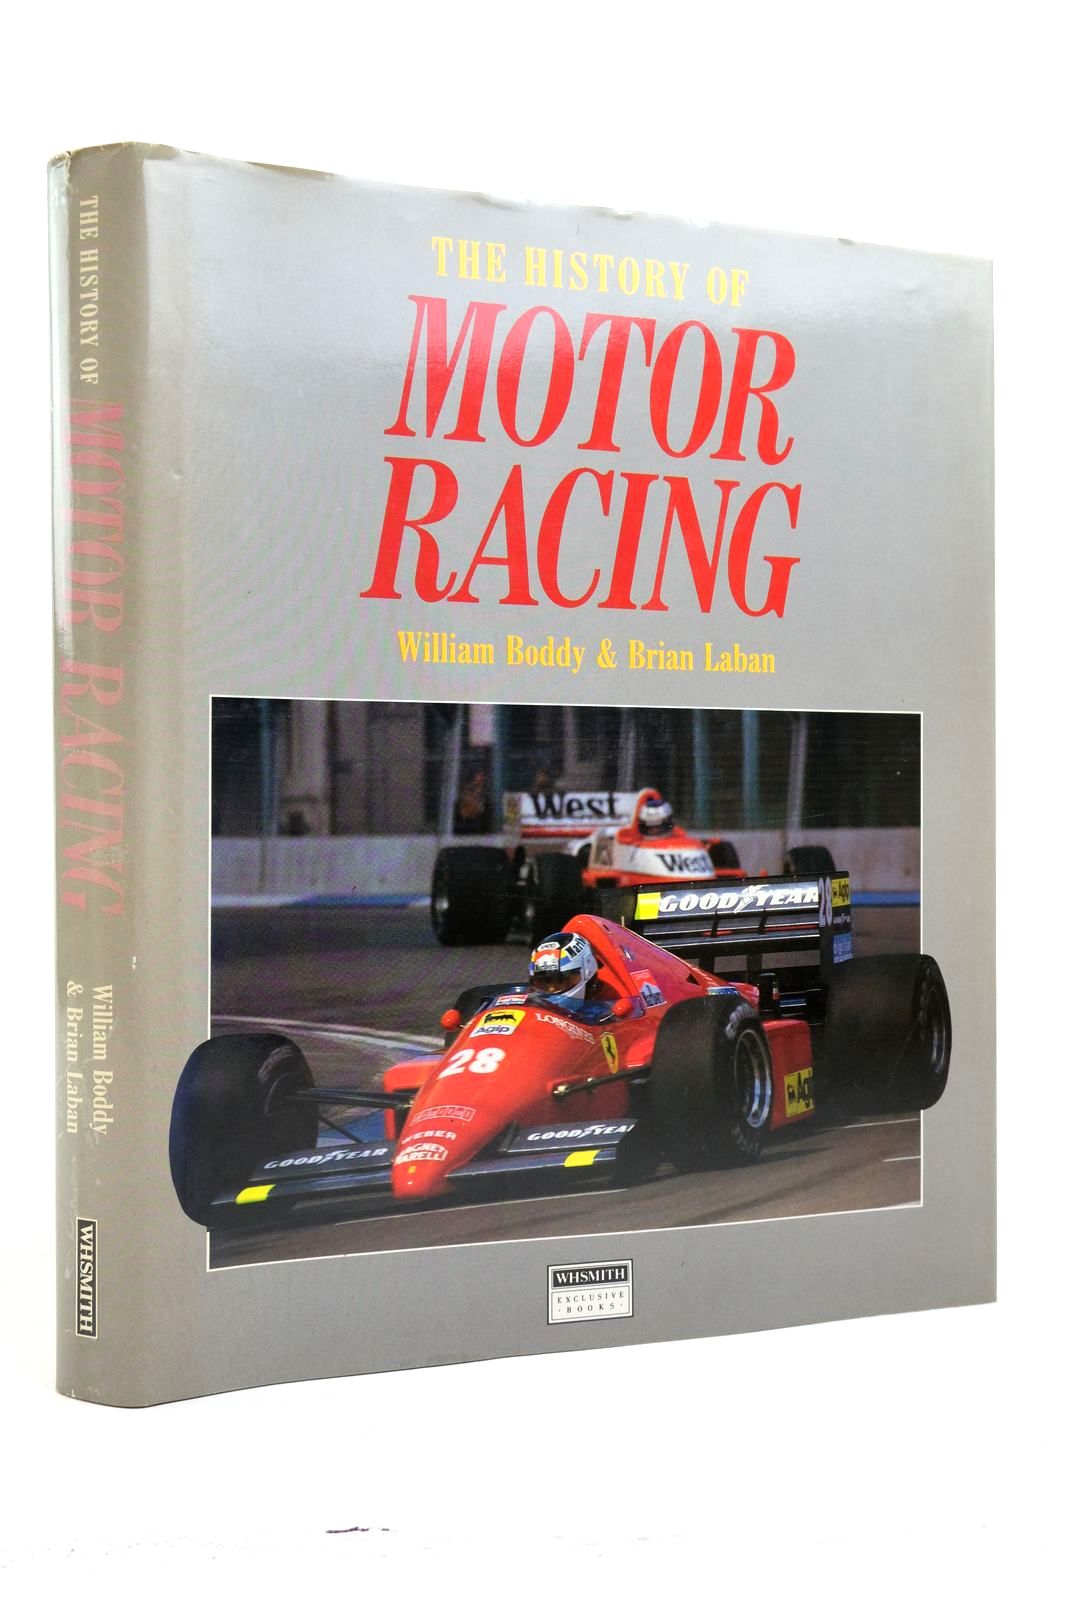 Photo of THE HISTORY OF MOTOR RACING written by Boddy, William published by W.H. Smith (STOCK CODE: 2139544)  for sale by Stella & Rose's Books